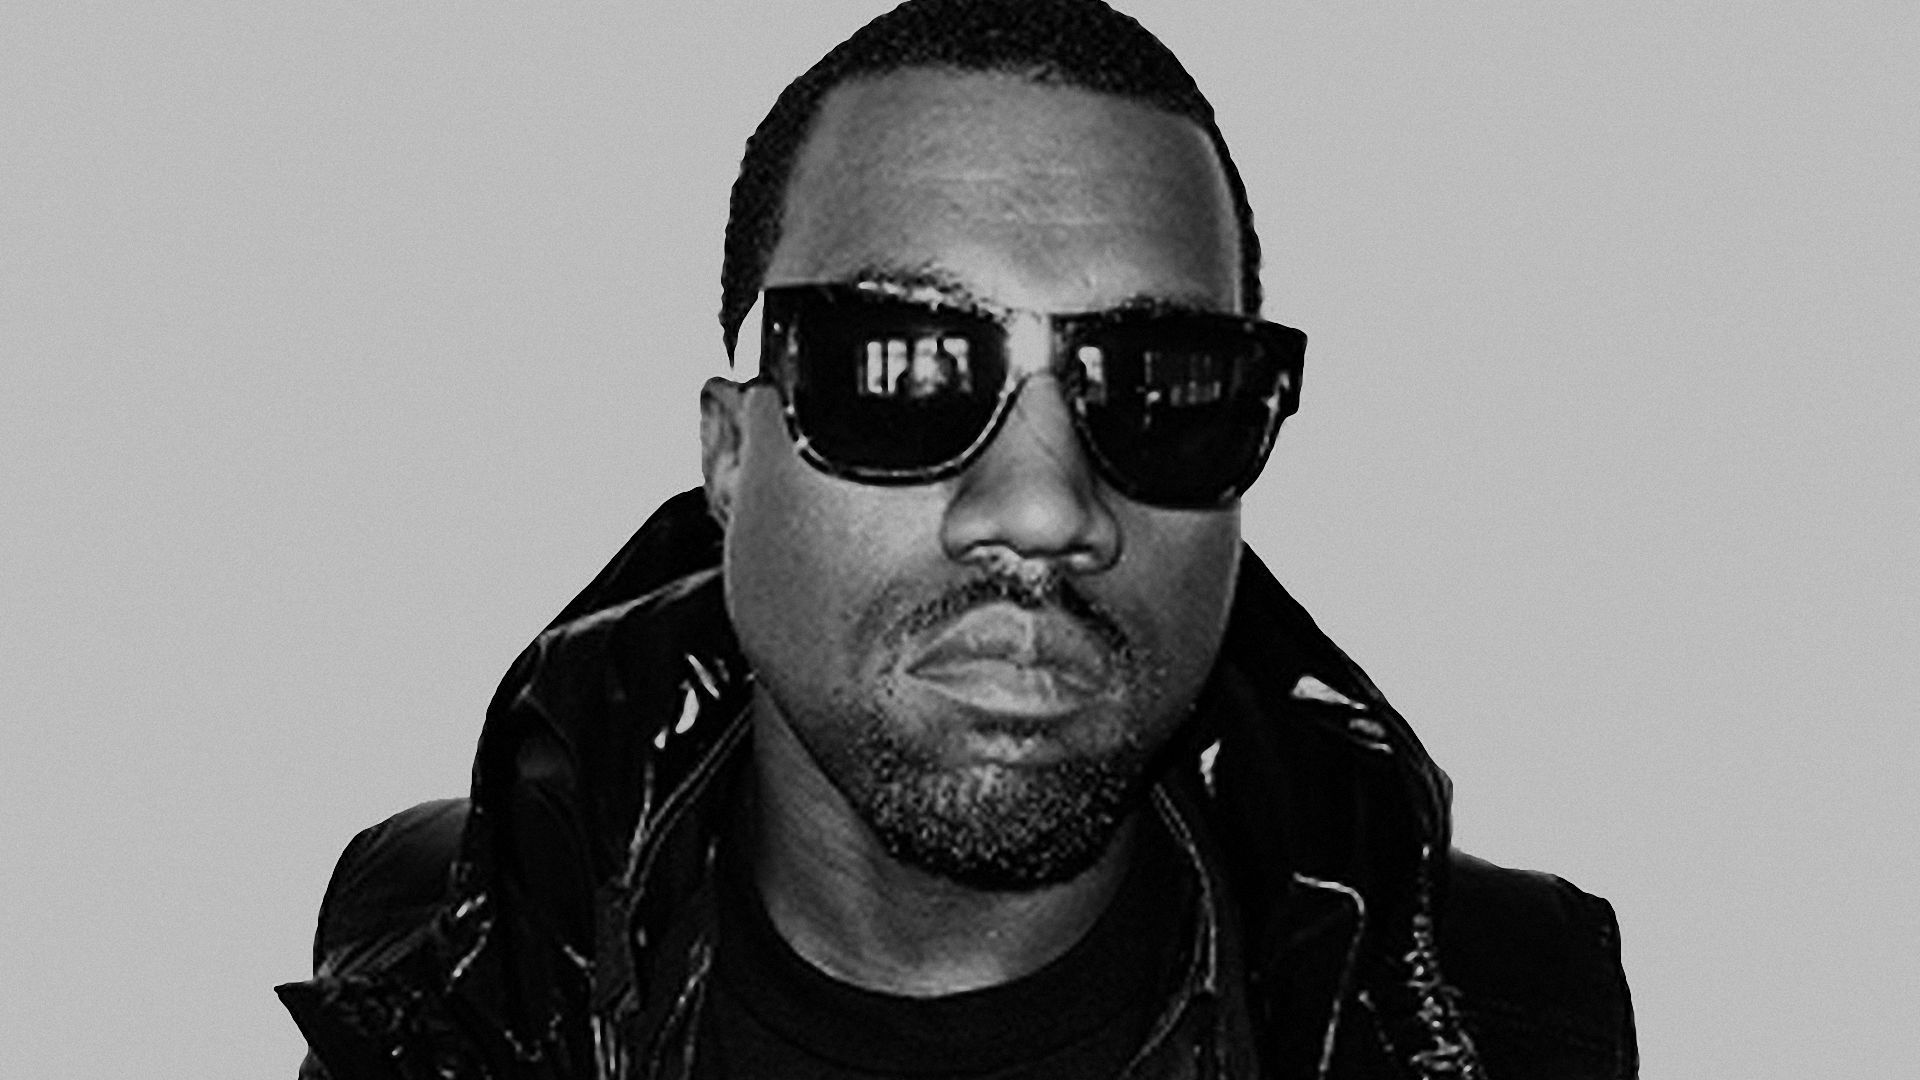 Kanye West Wallpaper 1920x1080 Wallpapers, 1920x1080 Wallpapers ...